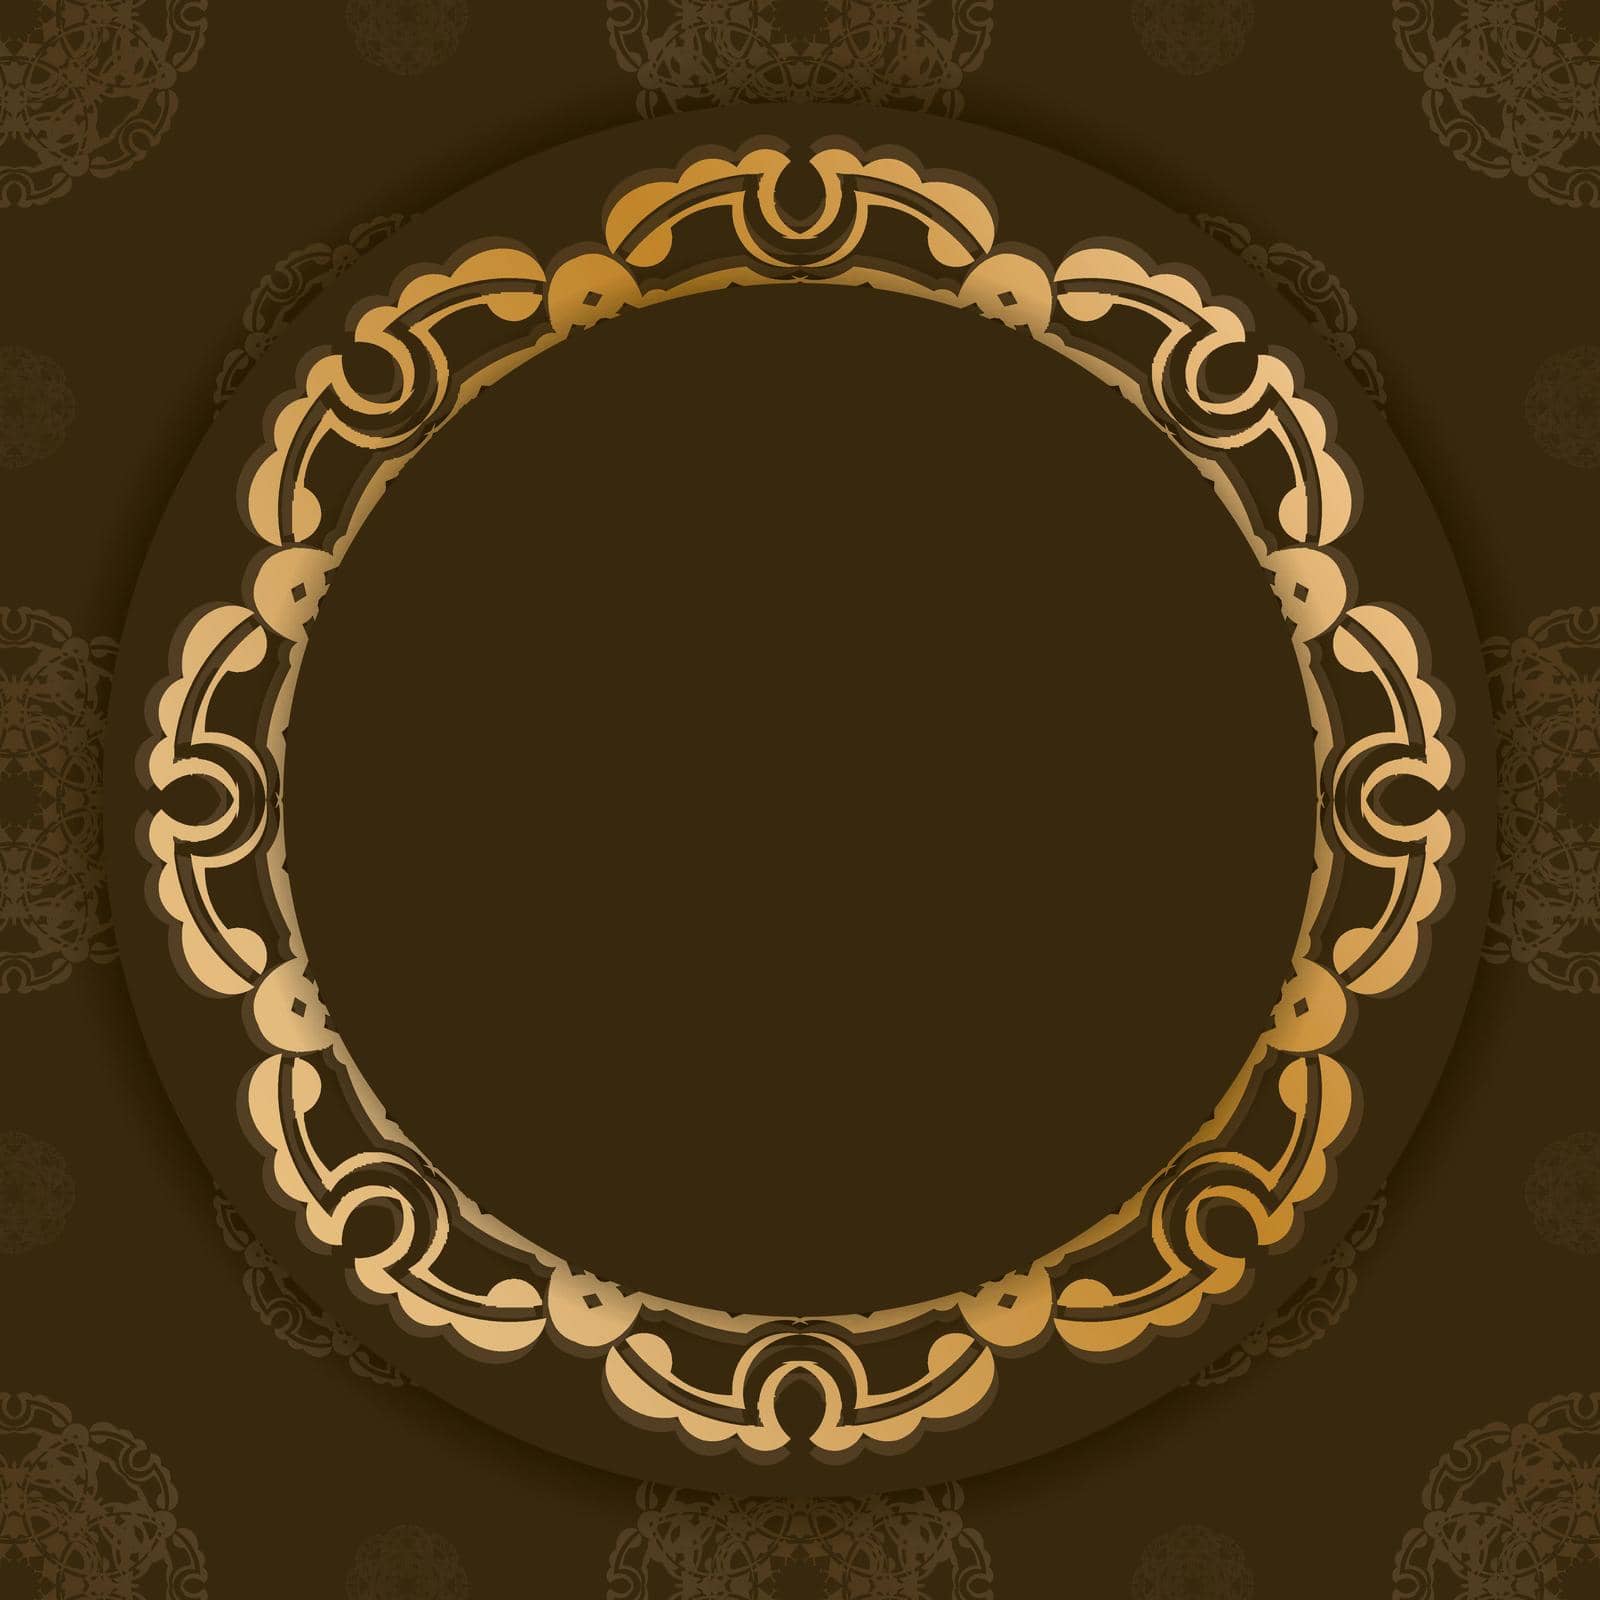 Leaflet in brown color with abstract gold ornament for your design.